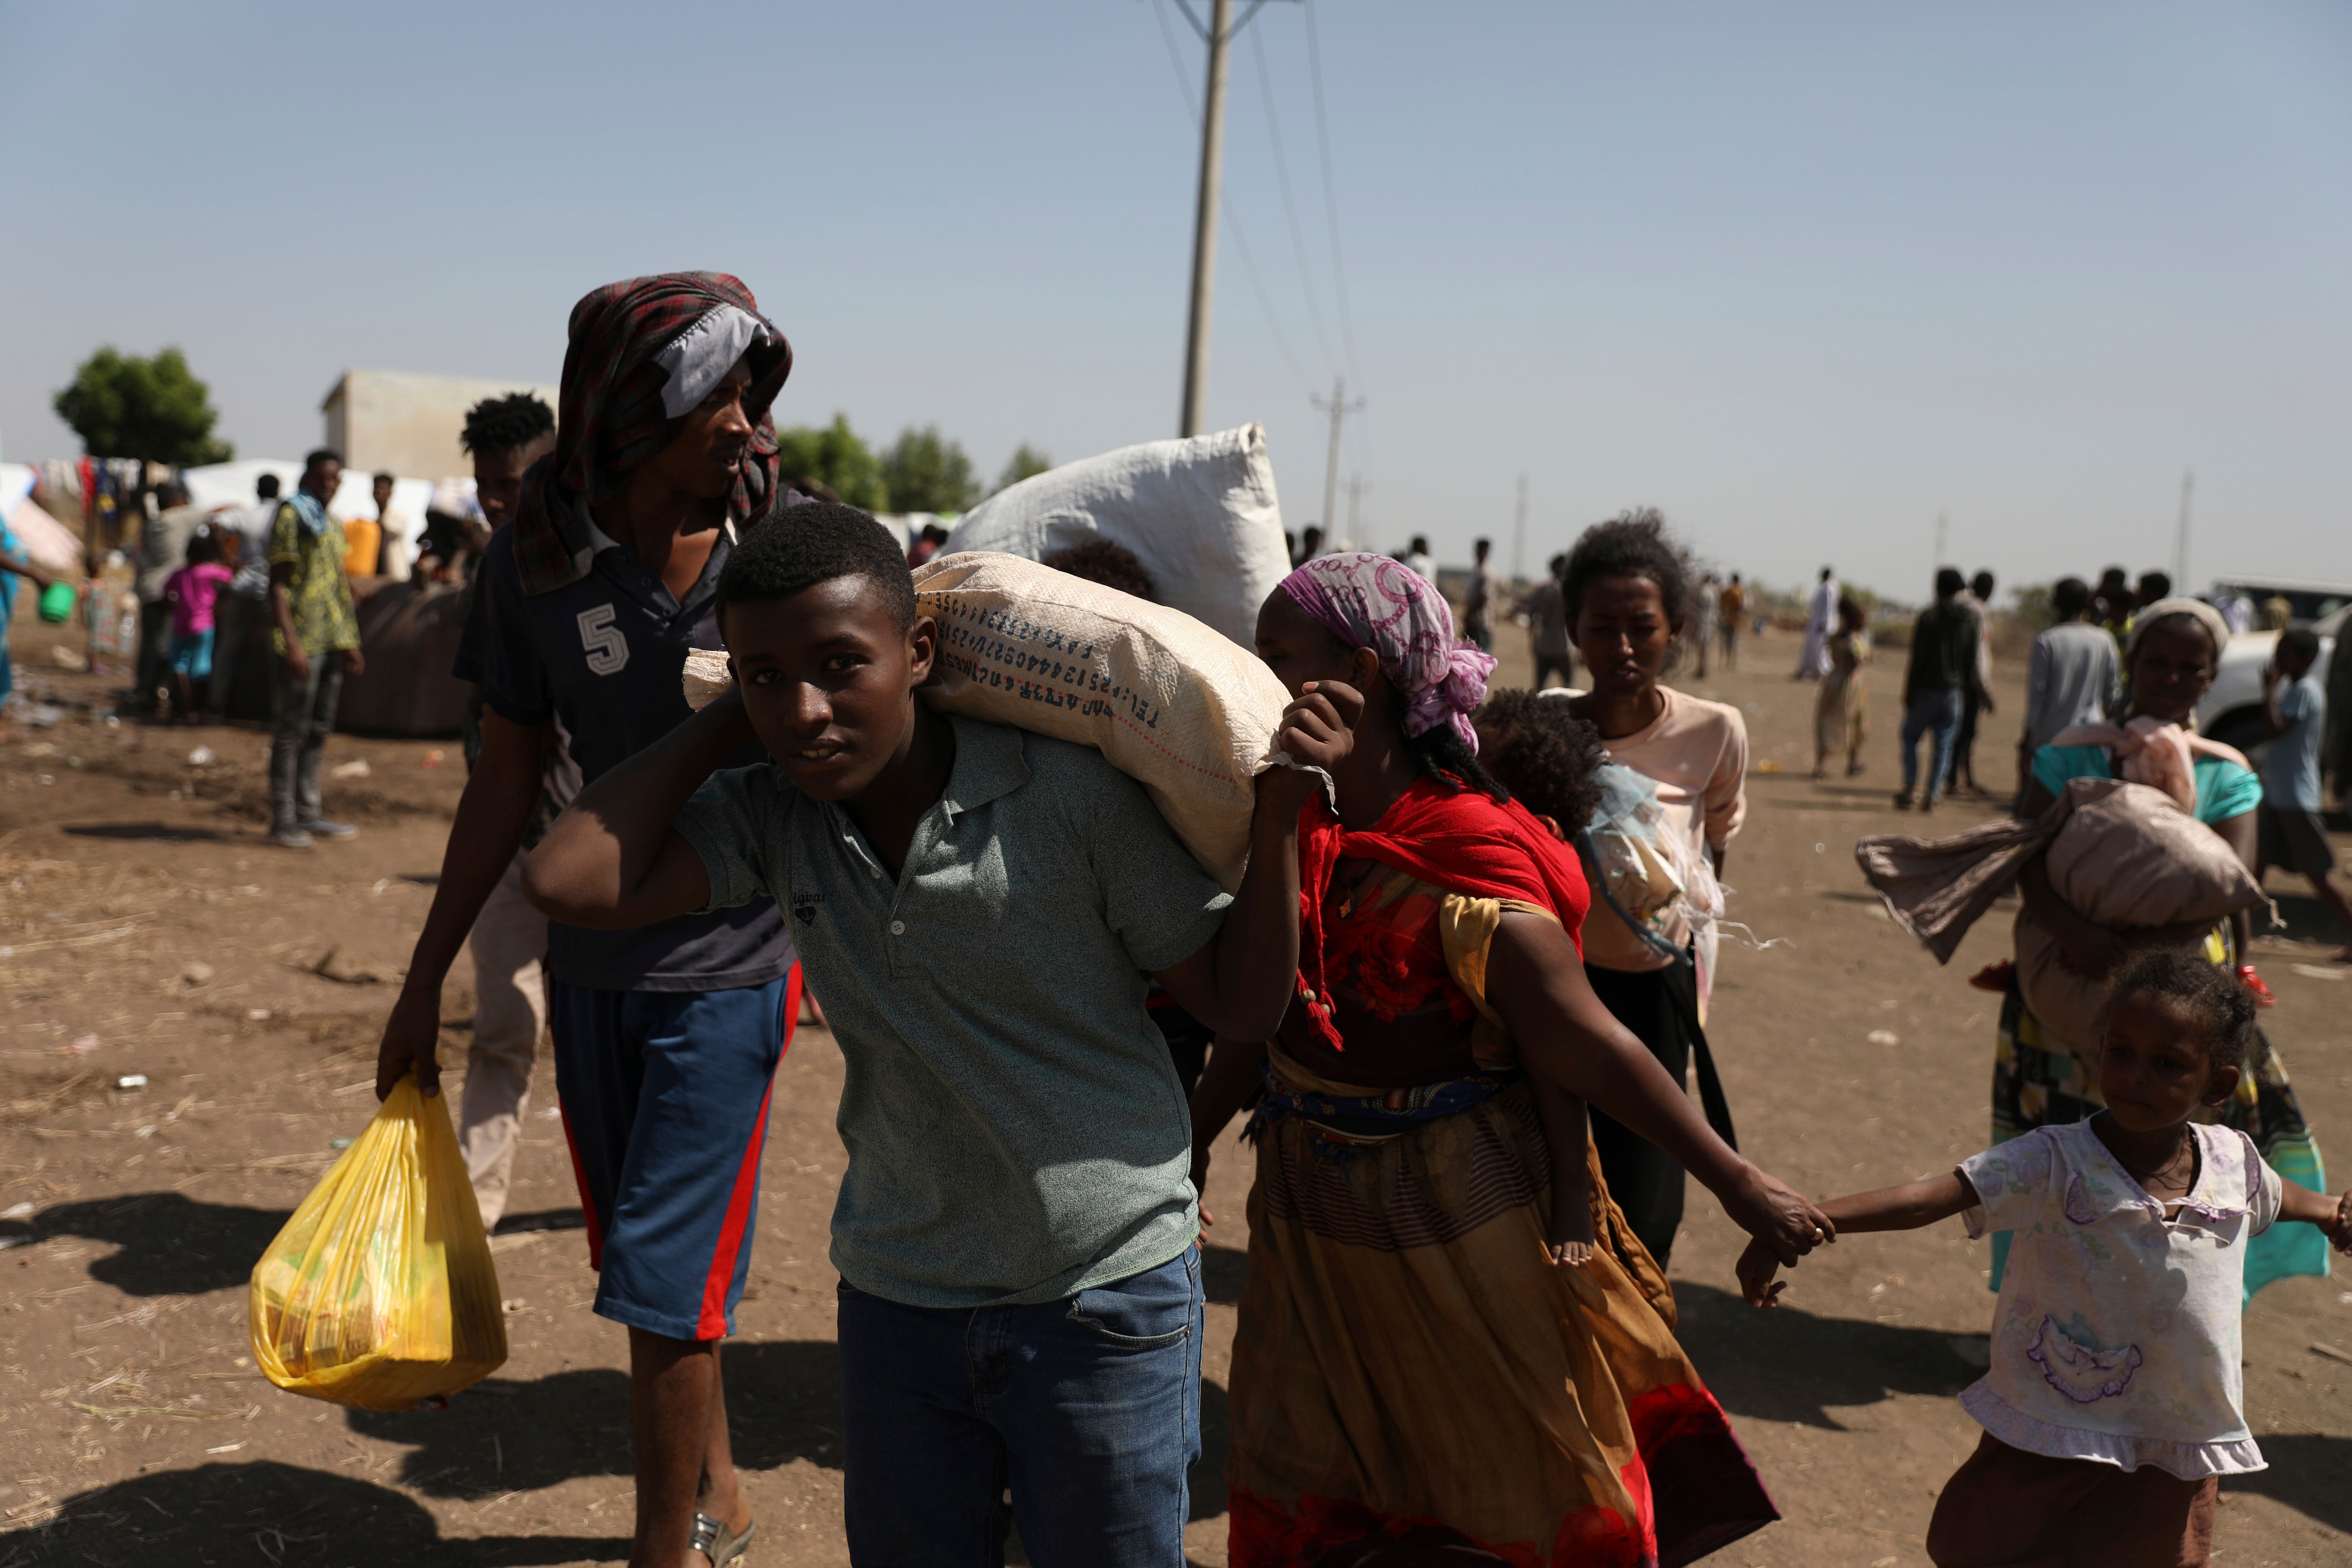 A Full Scale Humanitarian Crisis Is Unfolding In Northern Ethiopia As Tens Of Thousands Flee